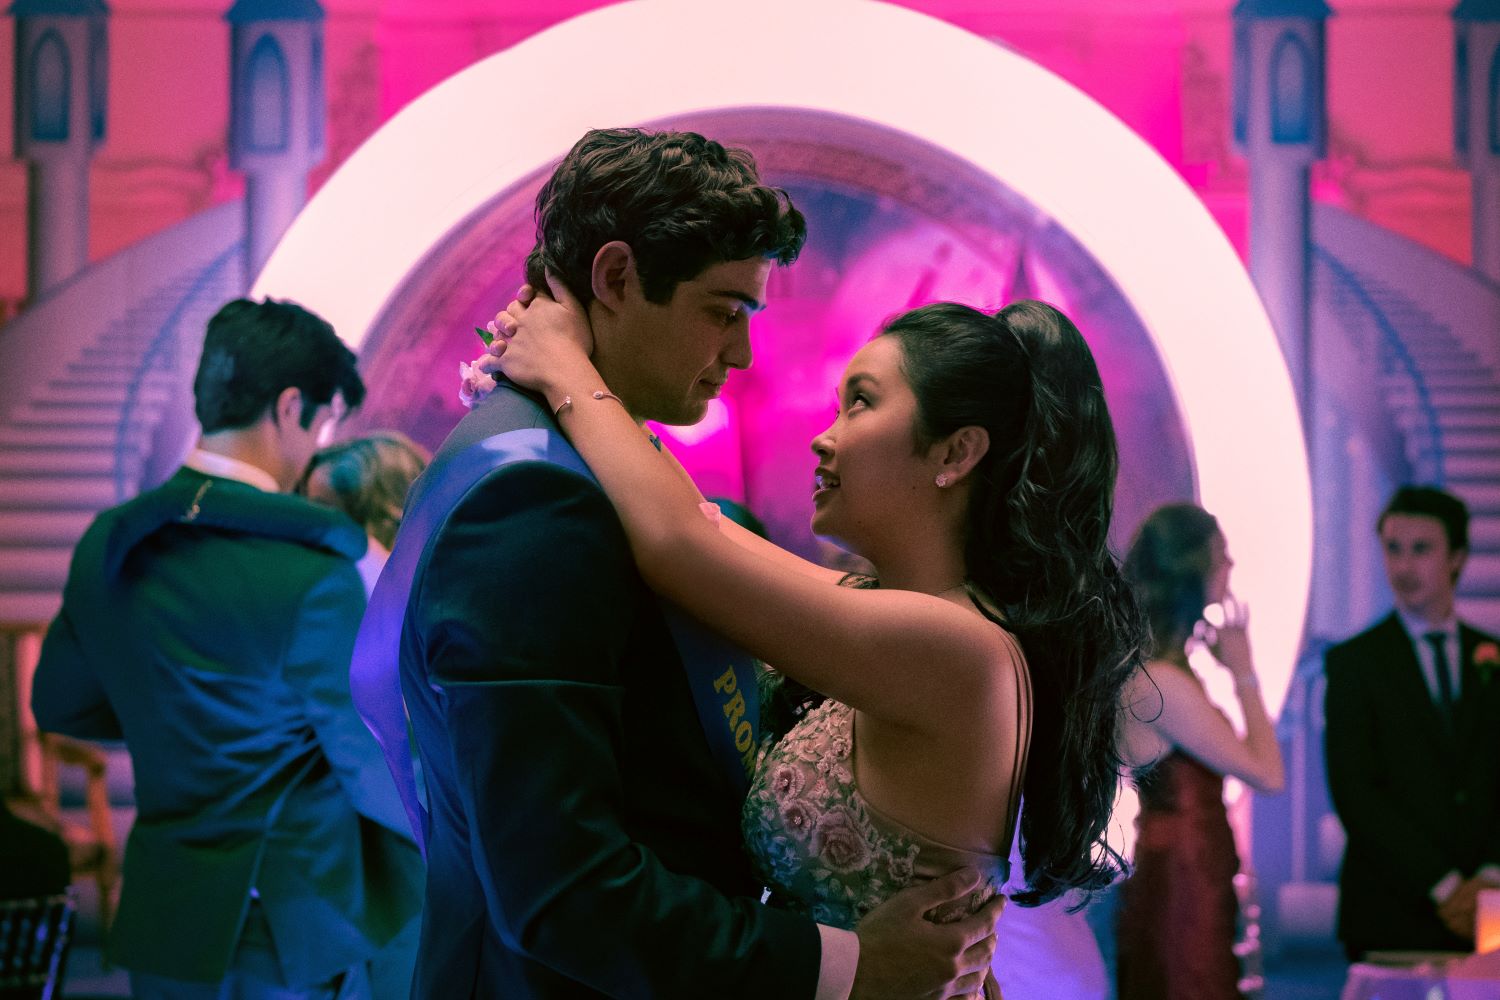 Noah Centineo and Lana Condor in 'To All The Boys I've Ever Loved'